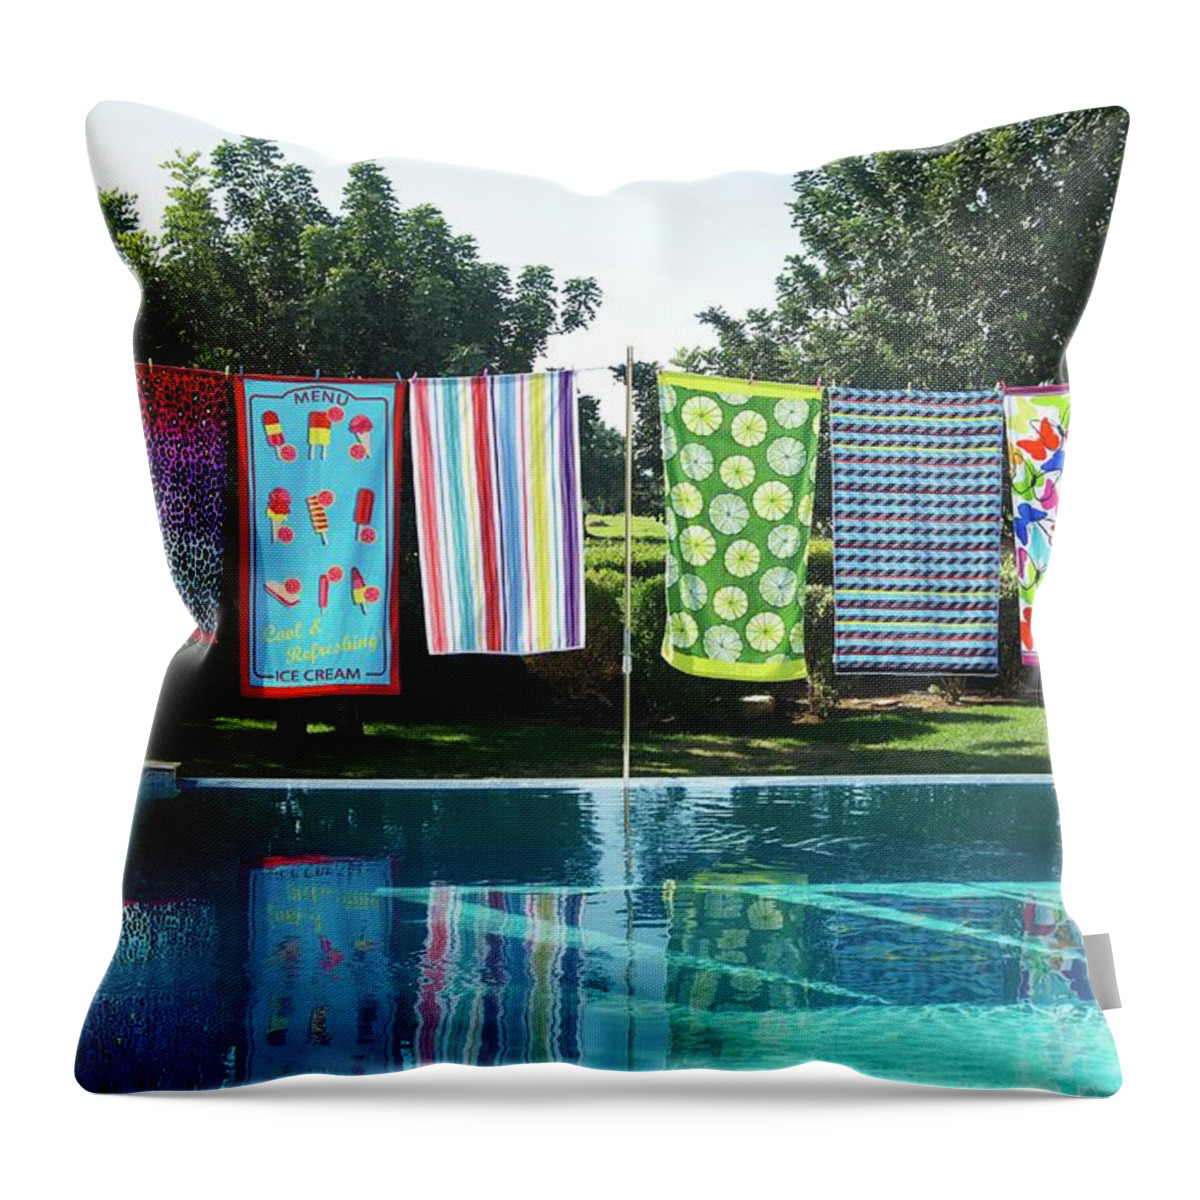 Ip_11244046 Throw Pillow featuring the photograph Colourful Patterned Towels On Washing Line On Edge Of Pool In Garden by Winfried Heinze